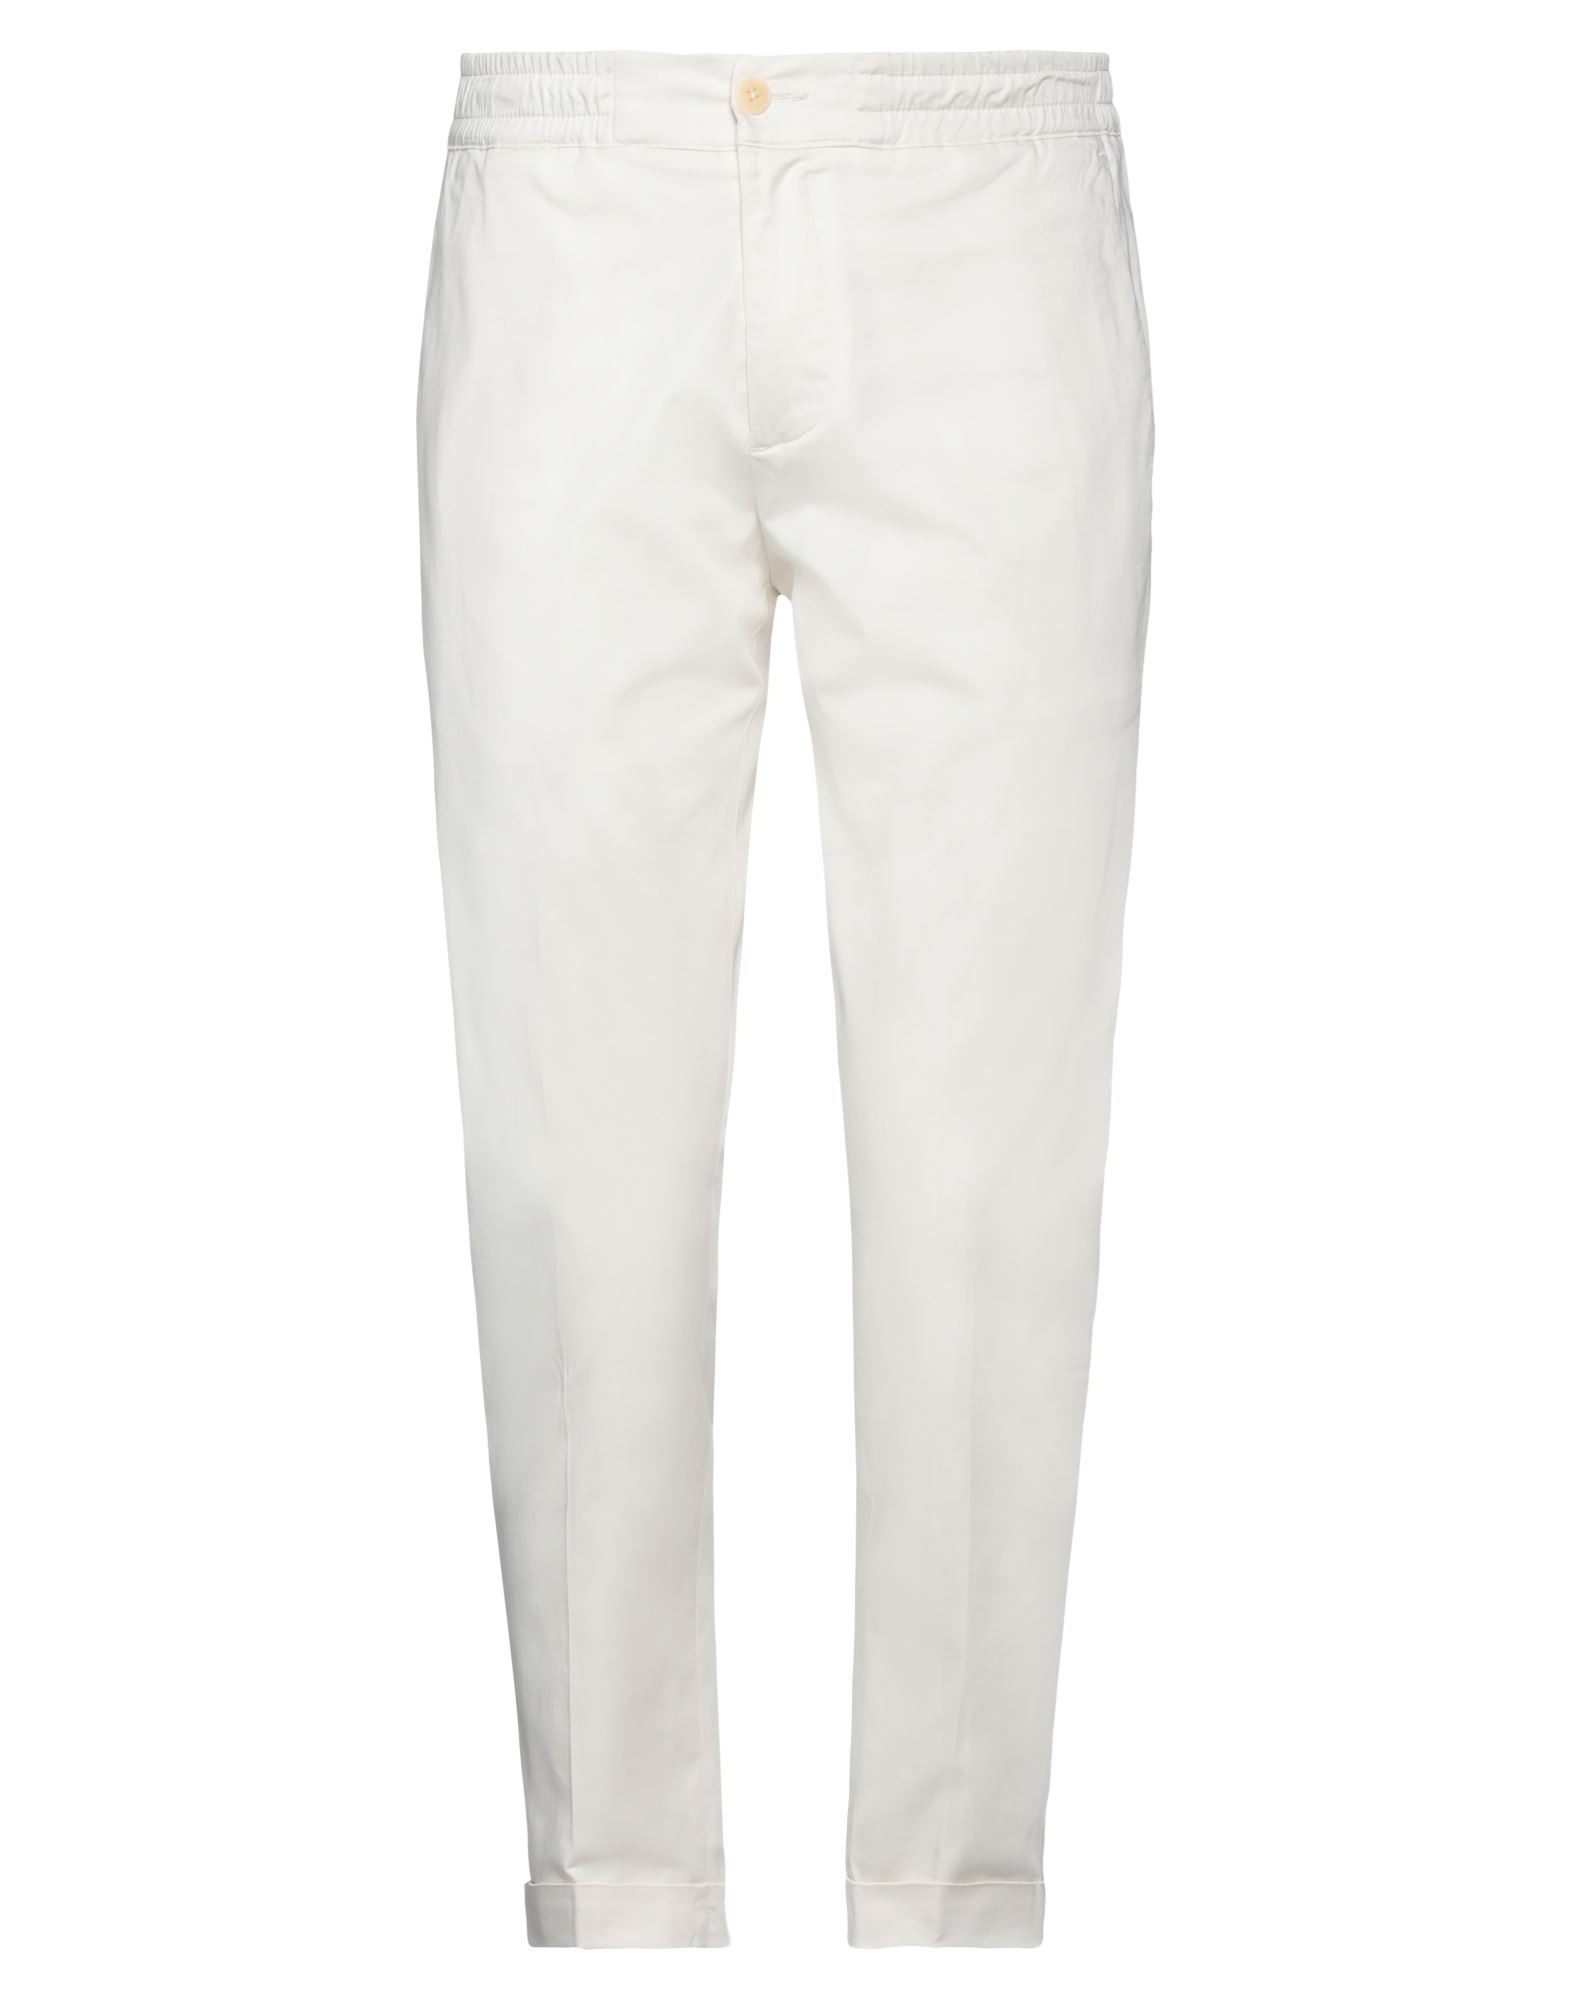 Golden Craft 1957 Pants In White